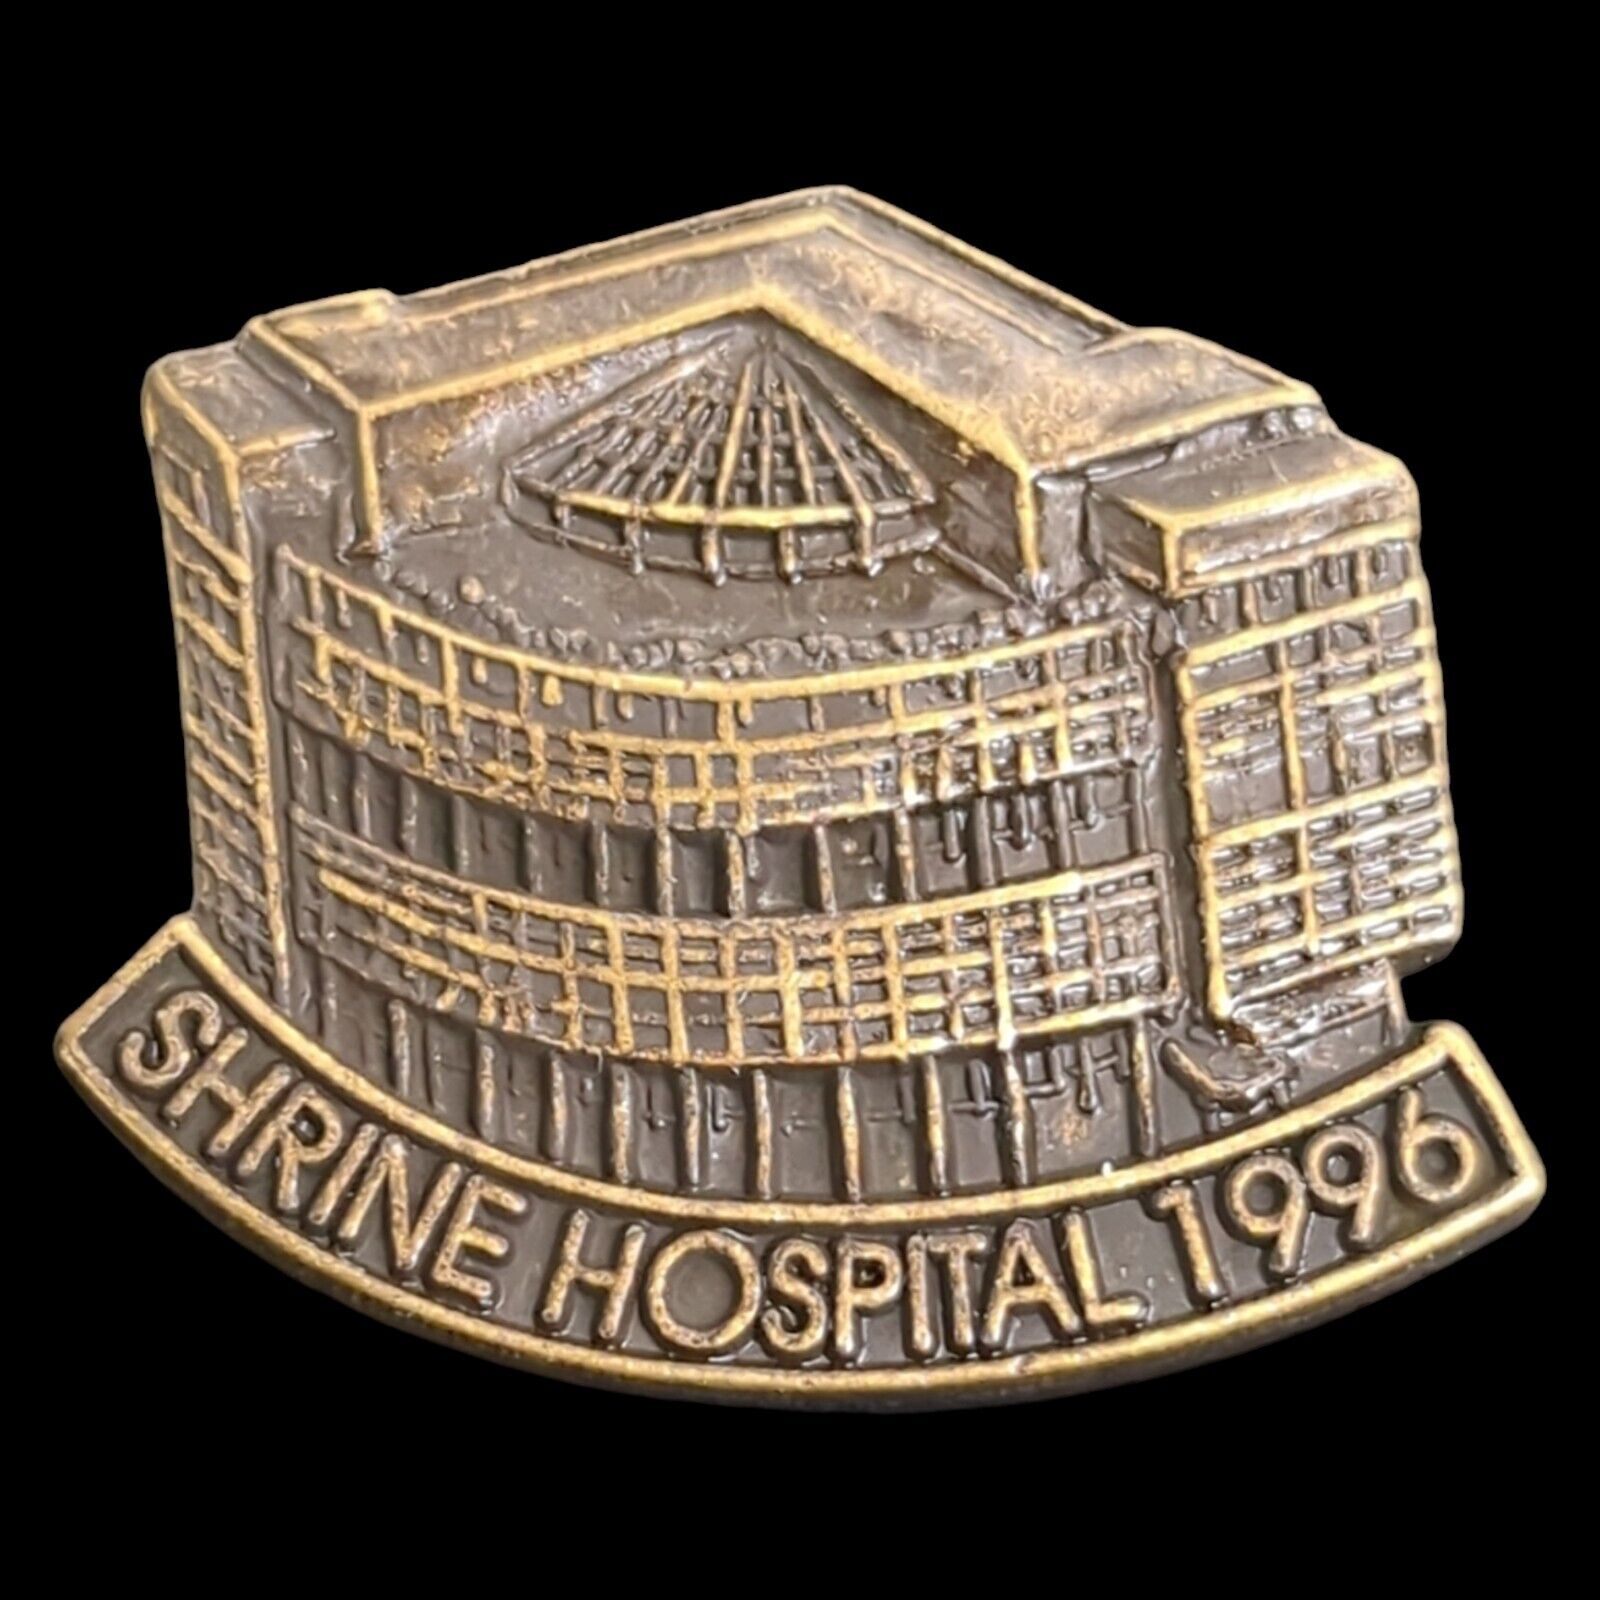 Vintage 1996 Shrine Hospital Lapel Hat Pin Building Medical Doctor Collectible